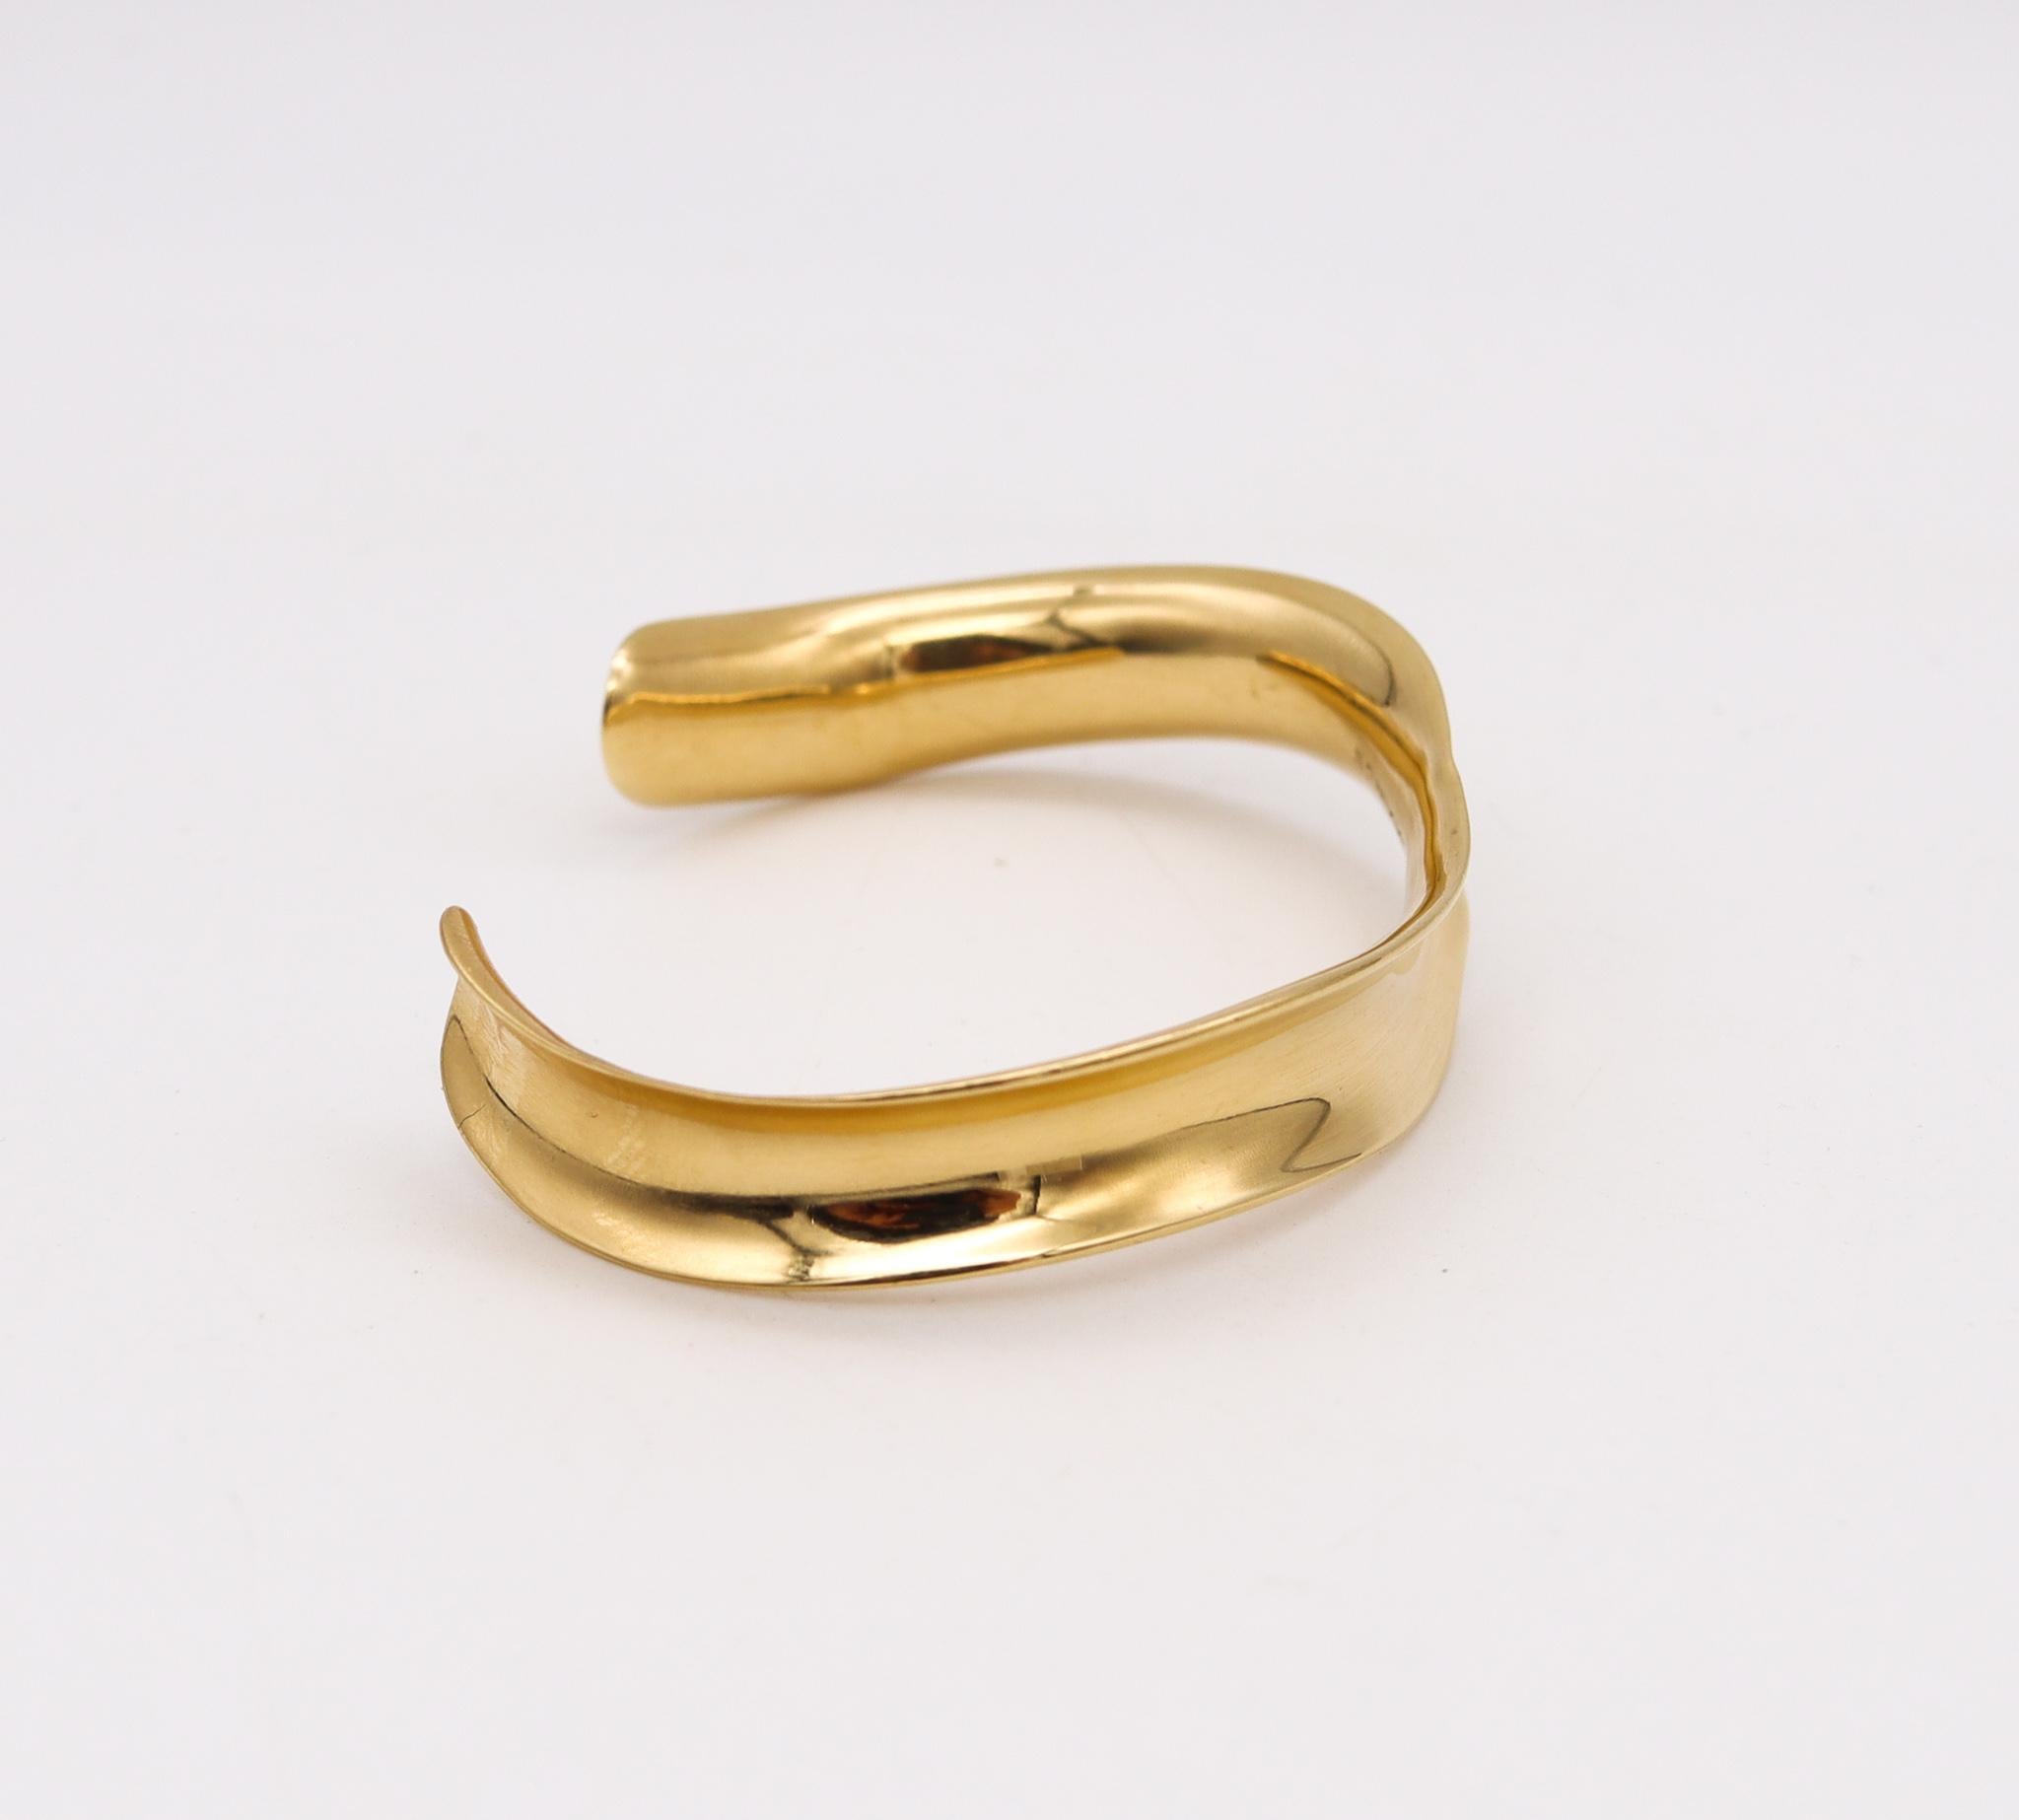 Modernist Tiffany & Co 1980 Angela Cummings Wave Cuff Bracelet In Solid 18Kt Yellow Gold For Sale